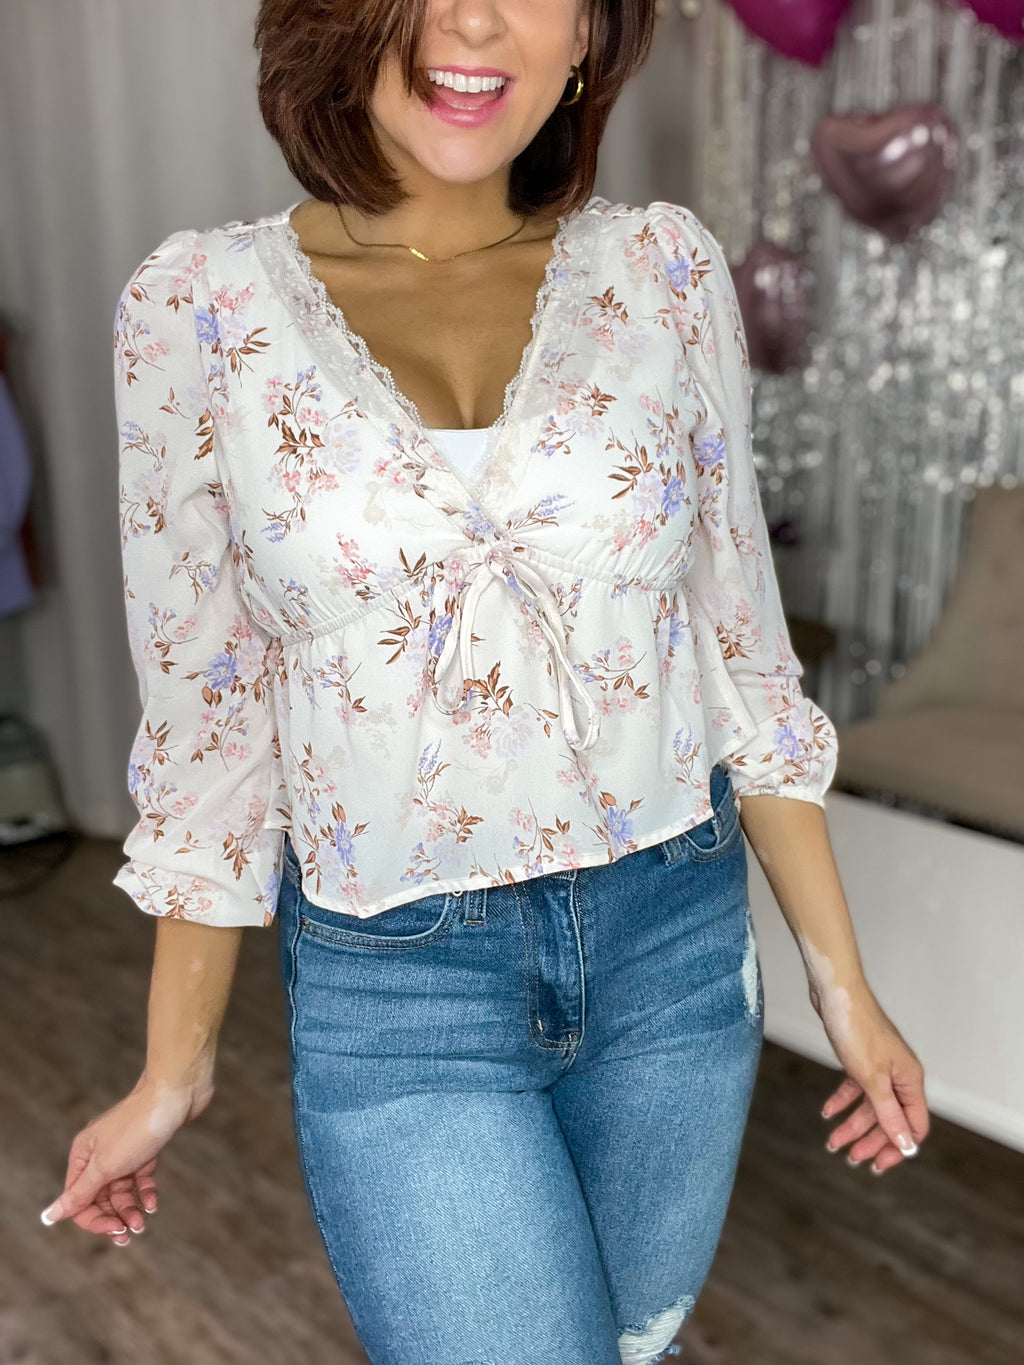 The Sweetest Thing Blouse